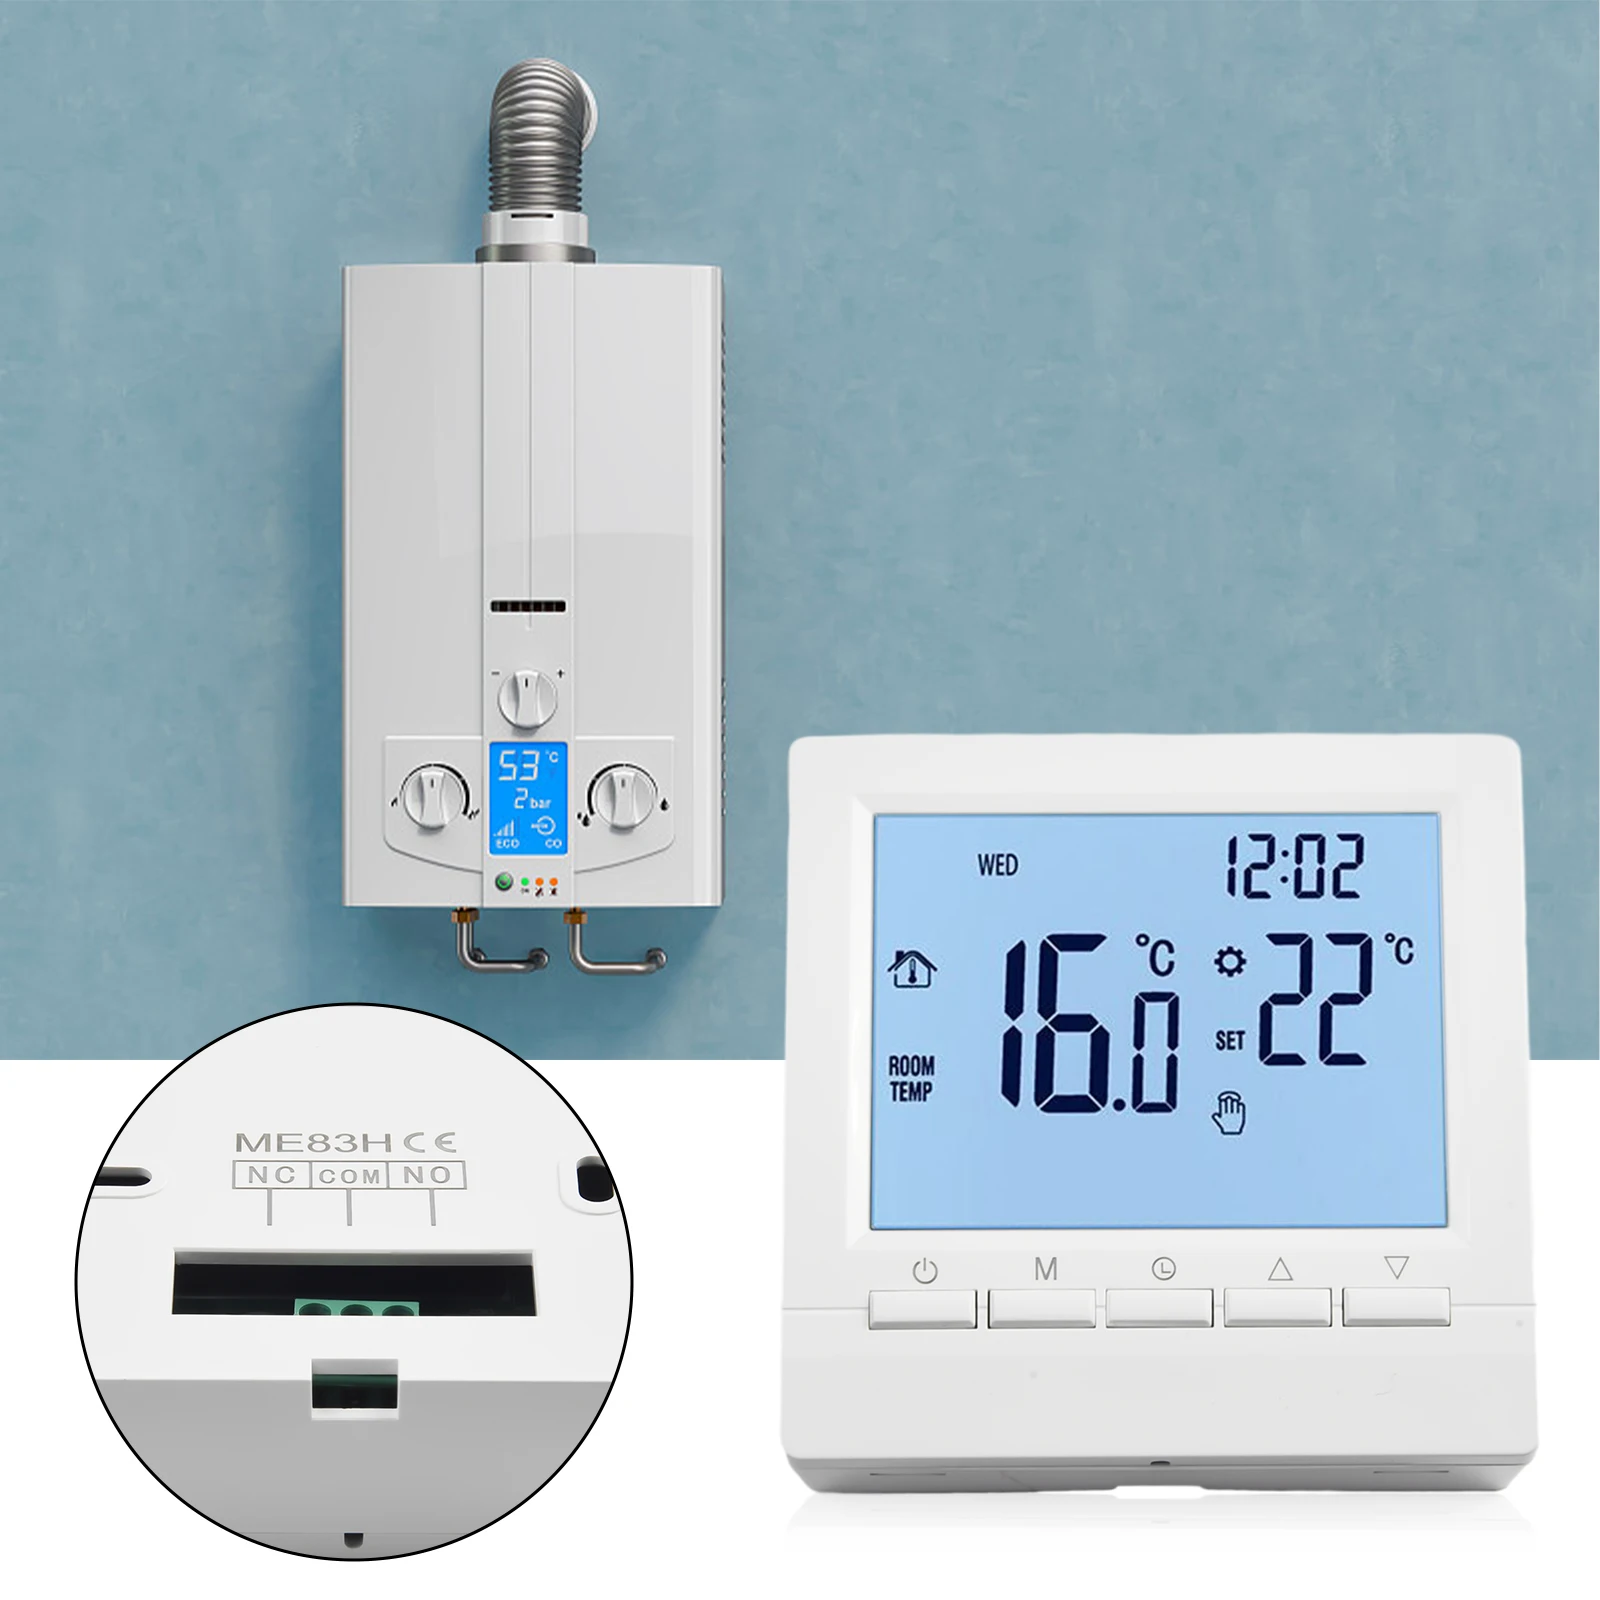 

3A Digital Gas Boiler Thermostat Weekly Programmable Electric Heating Room Thermostat Temperature Controller LCD Screen